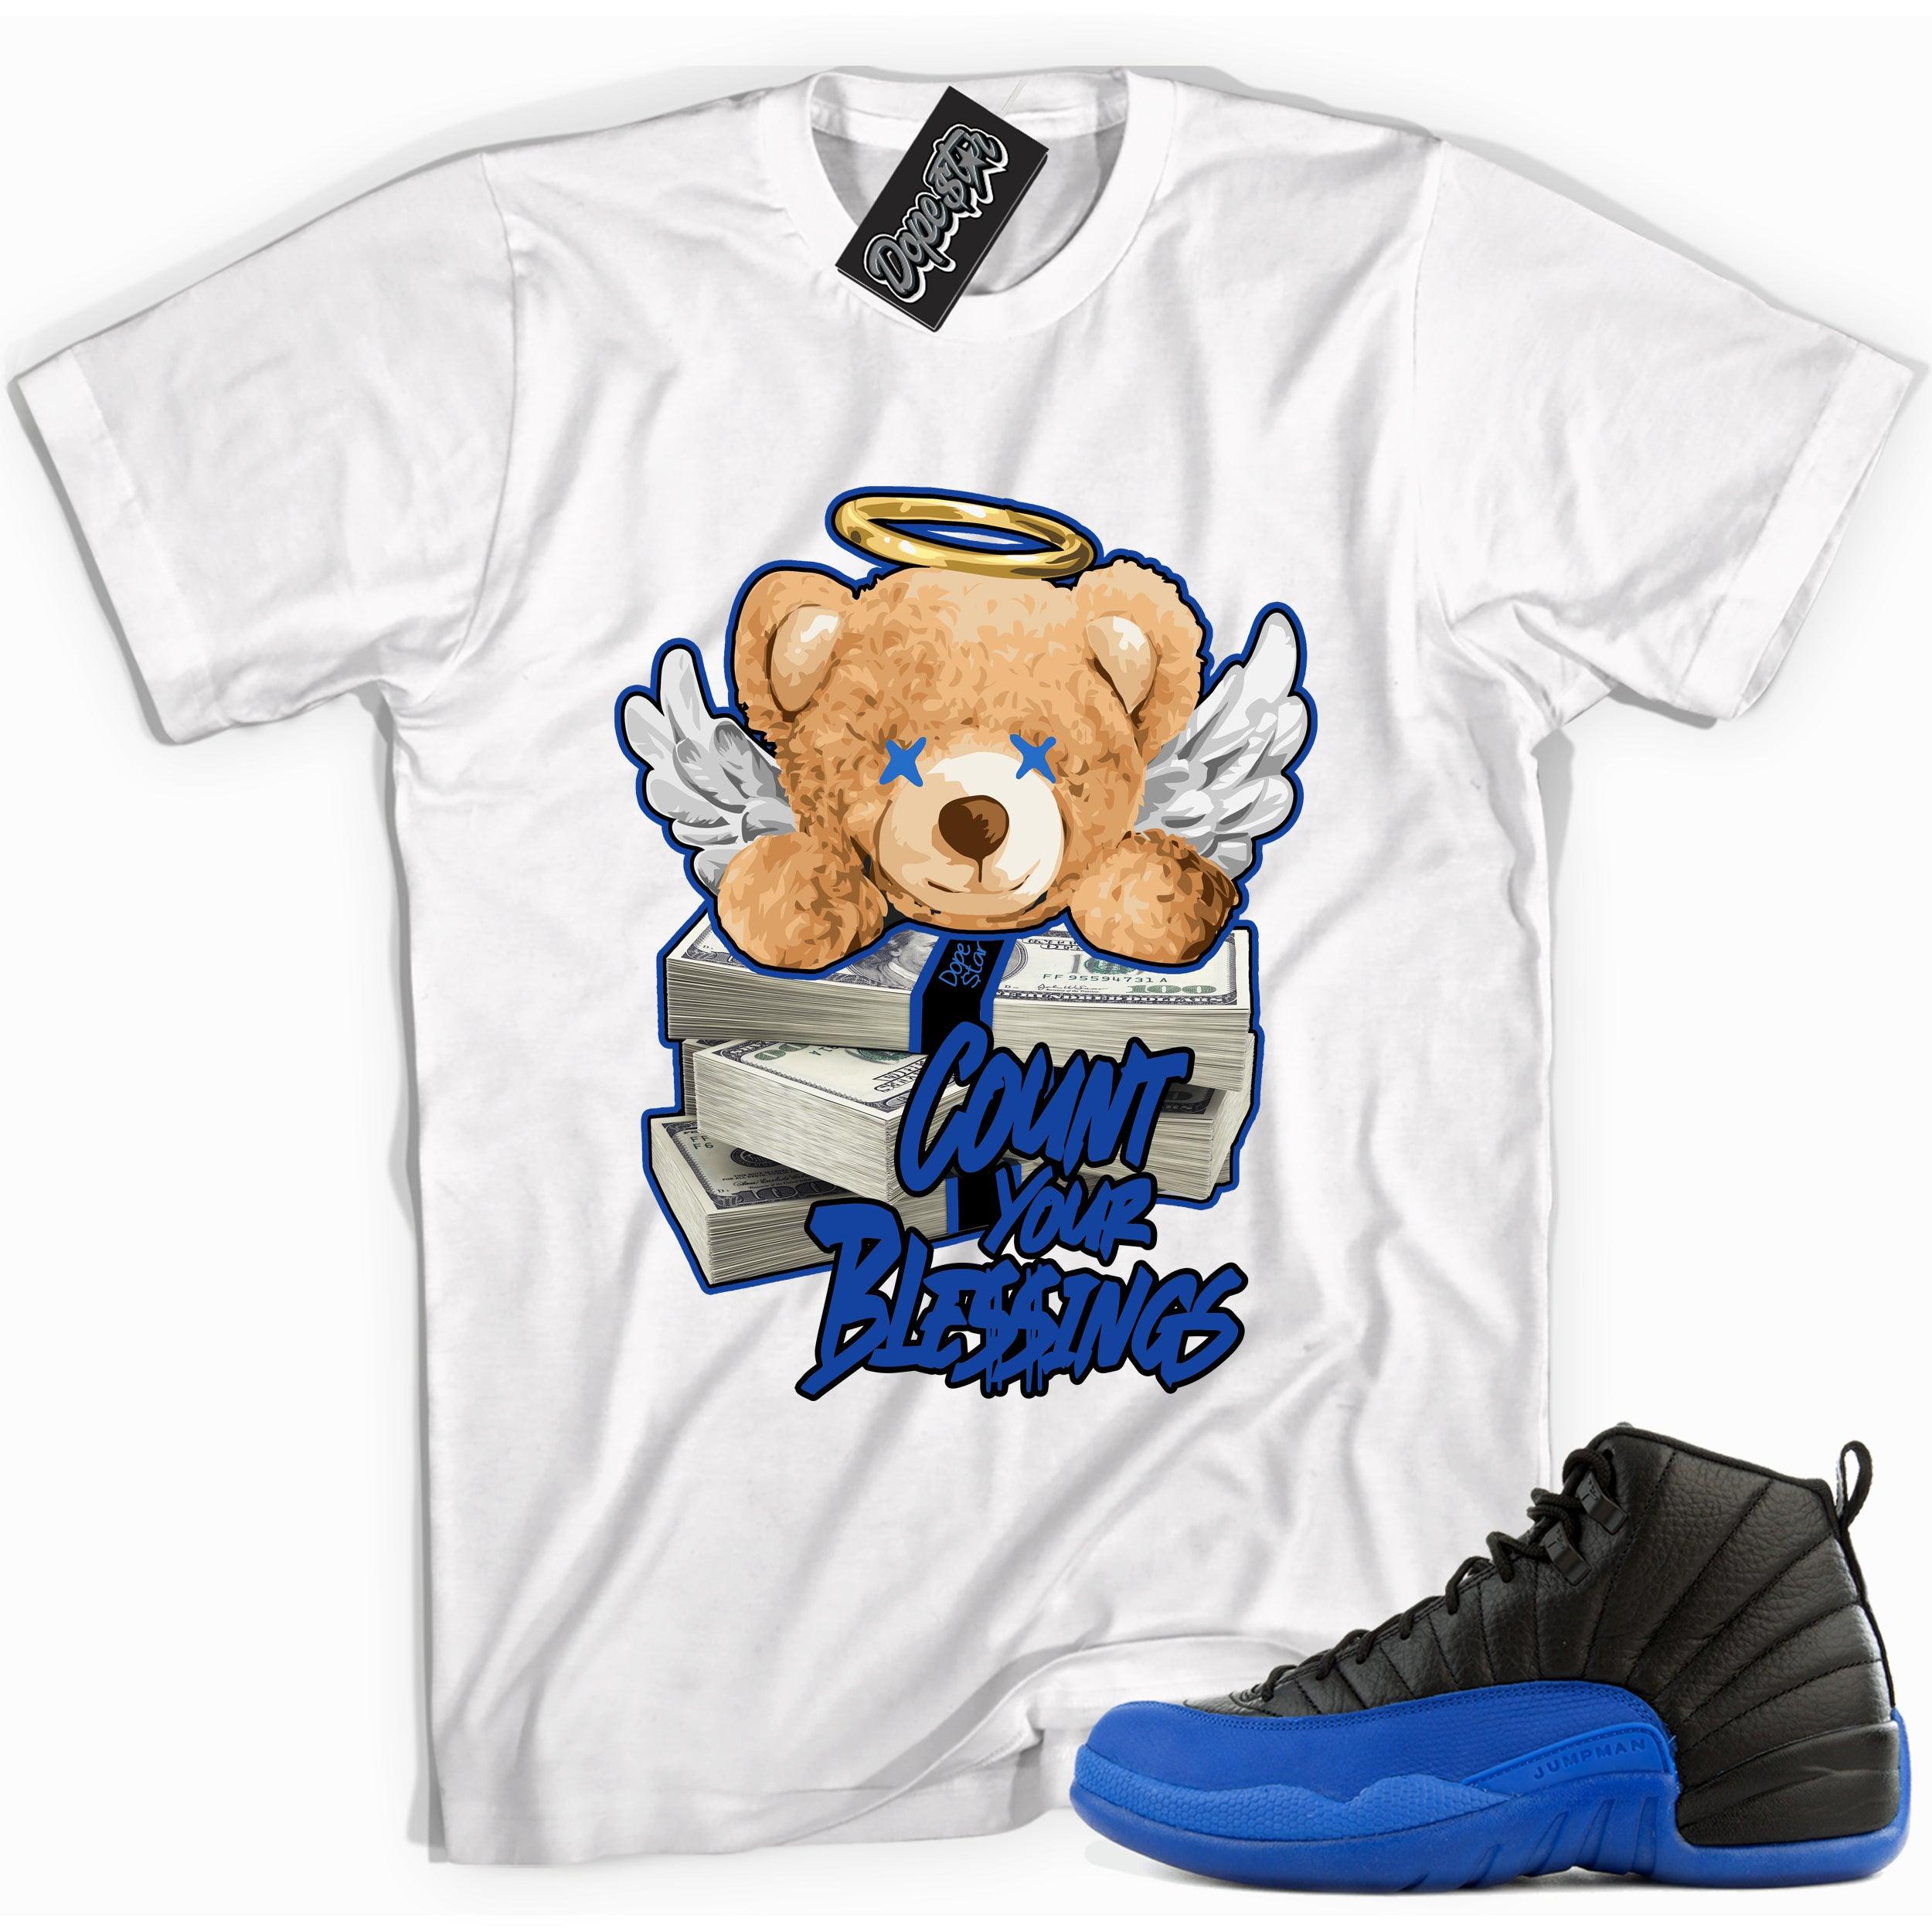 Cool white graphic tee with 'count your blessings' print, that perfectly matches Air Jordan 12 Retro Black Game Royal sneakers.